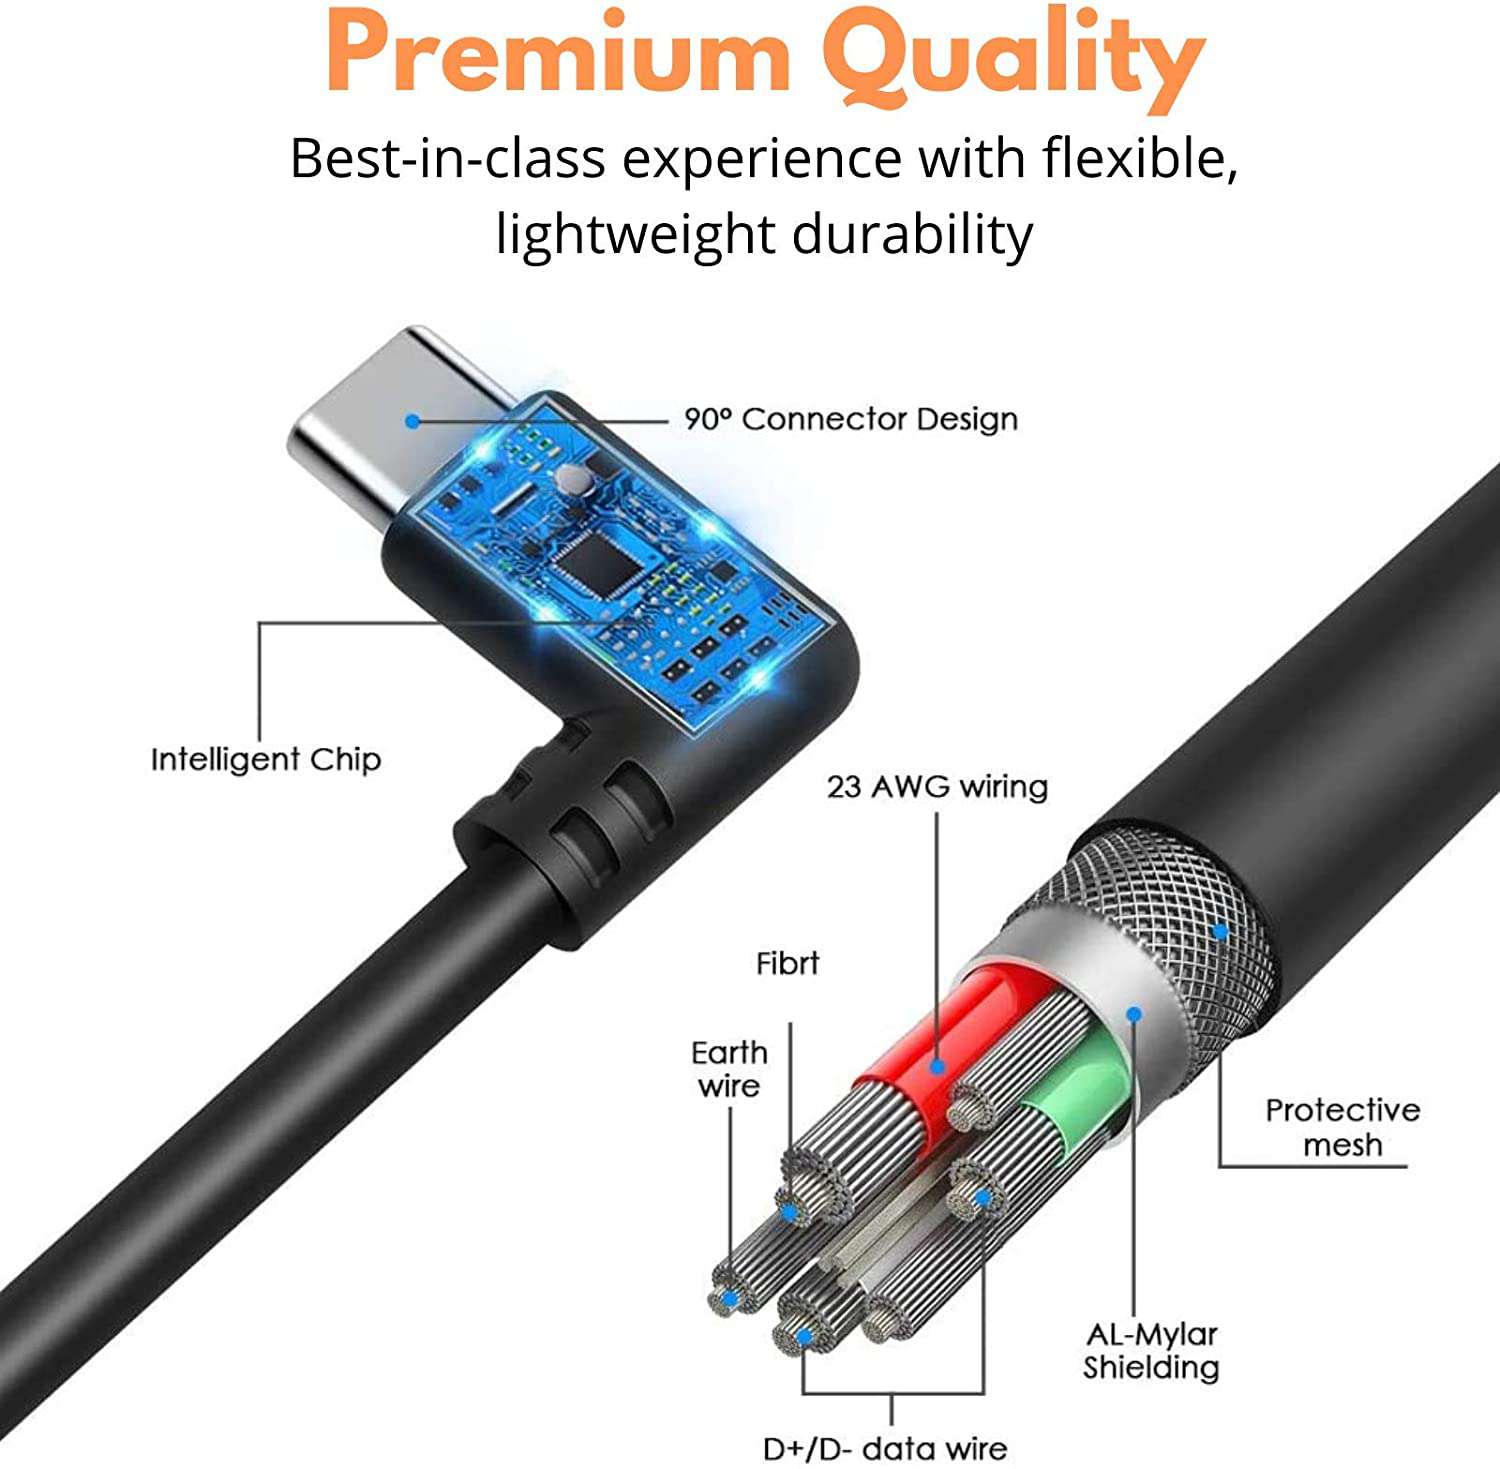 Detailed Showcase of the 90 degree Connector and Cable Quality